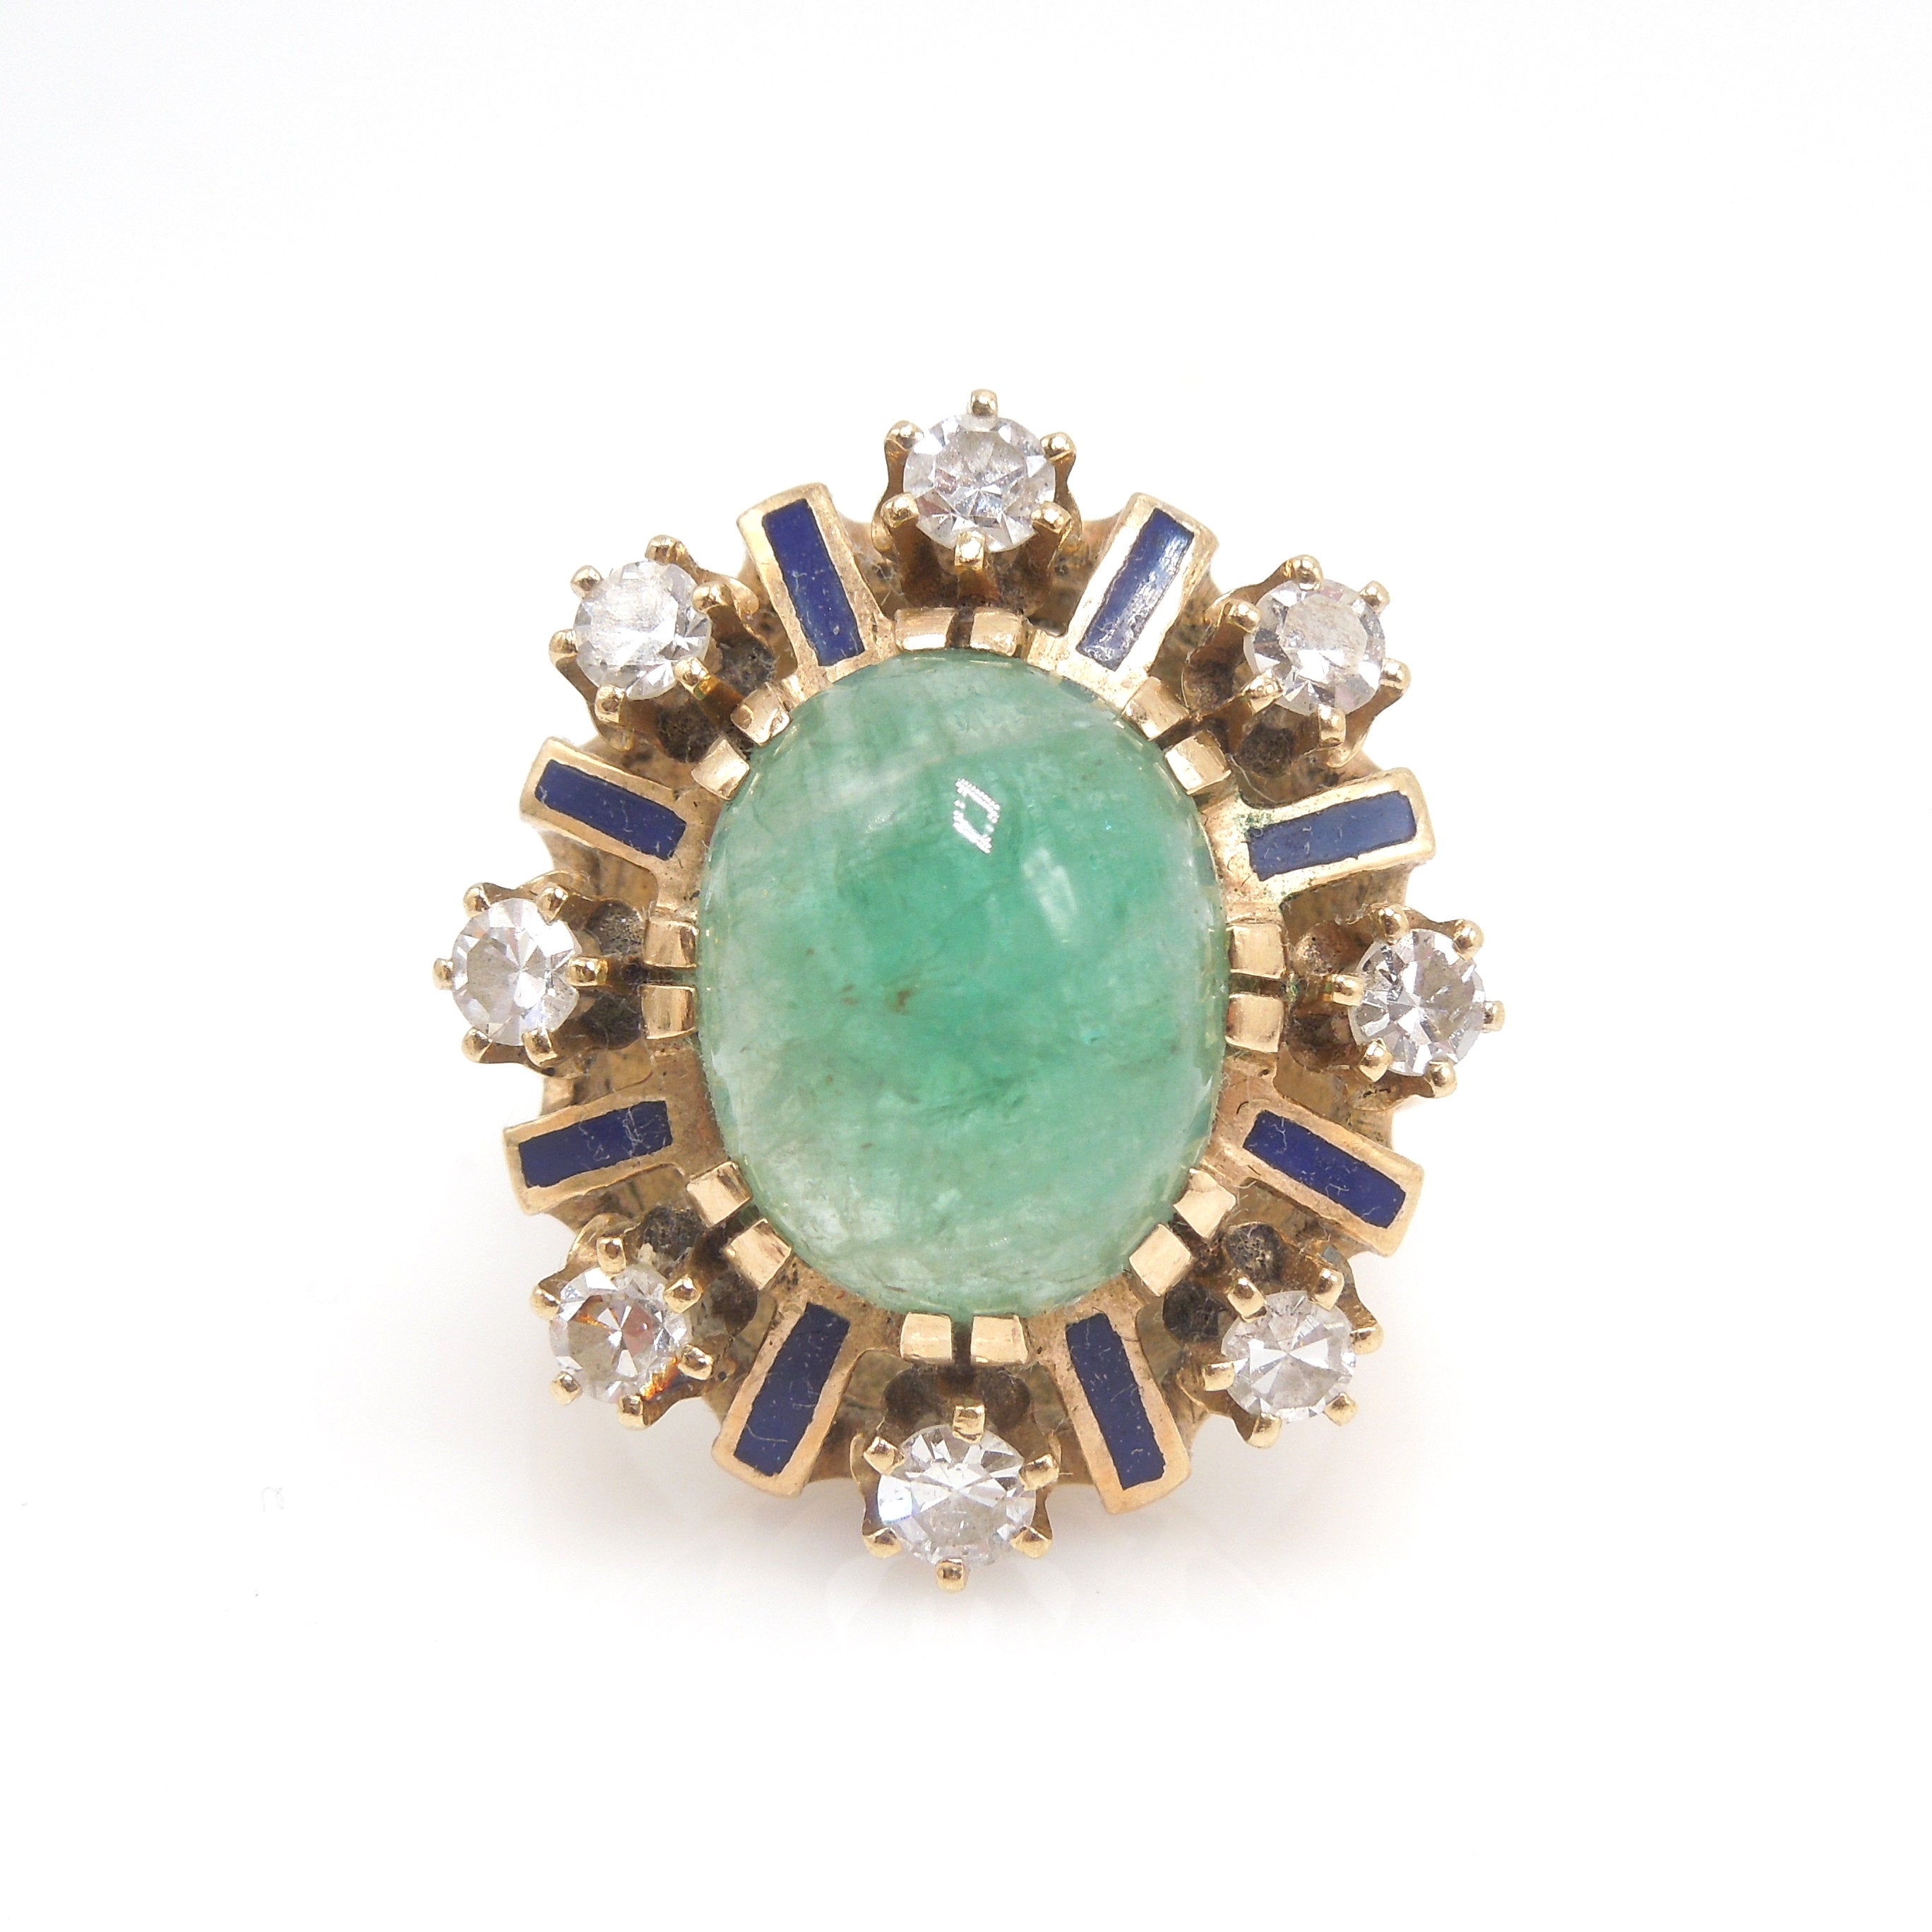 5.00ct Cabochon Emerald Ring - Antique/Victorian - with Enamel and Antique Cut Diamonds